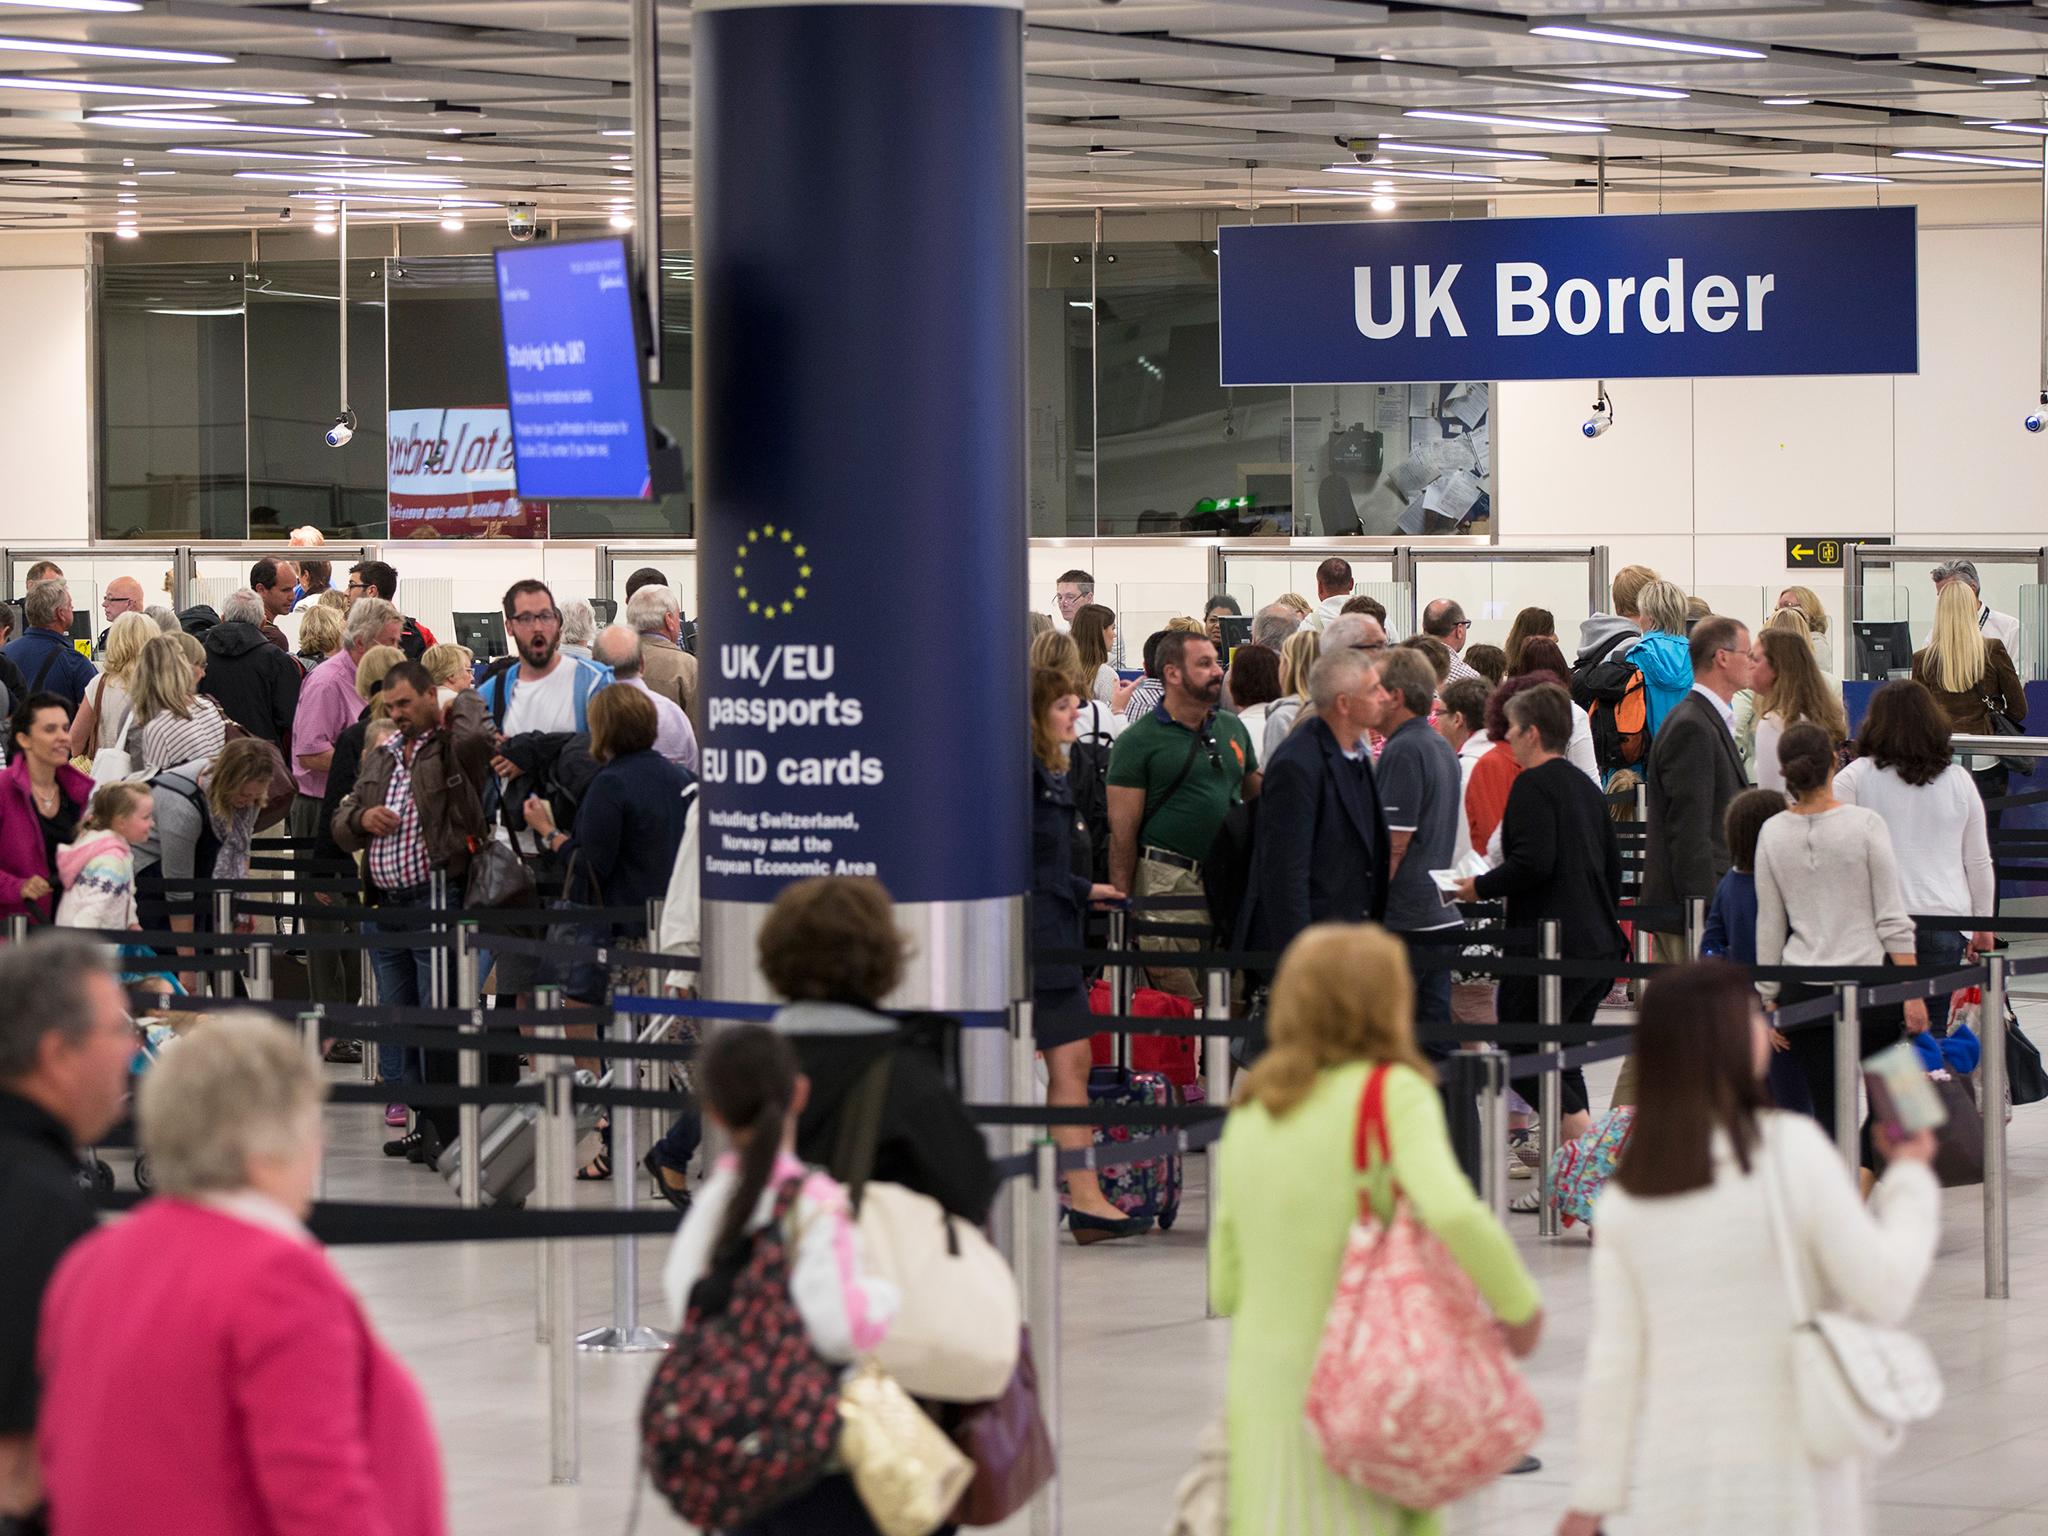 Only one in five Britons say immigration has made their own life worse